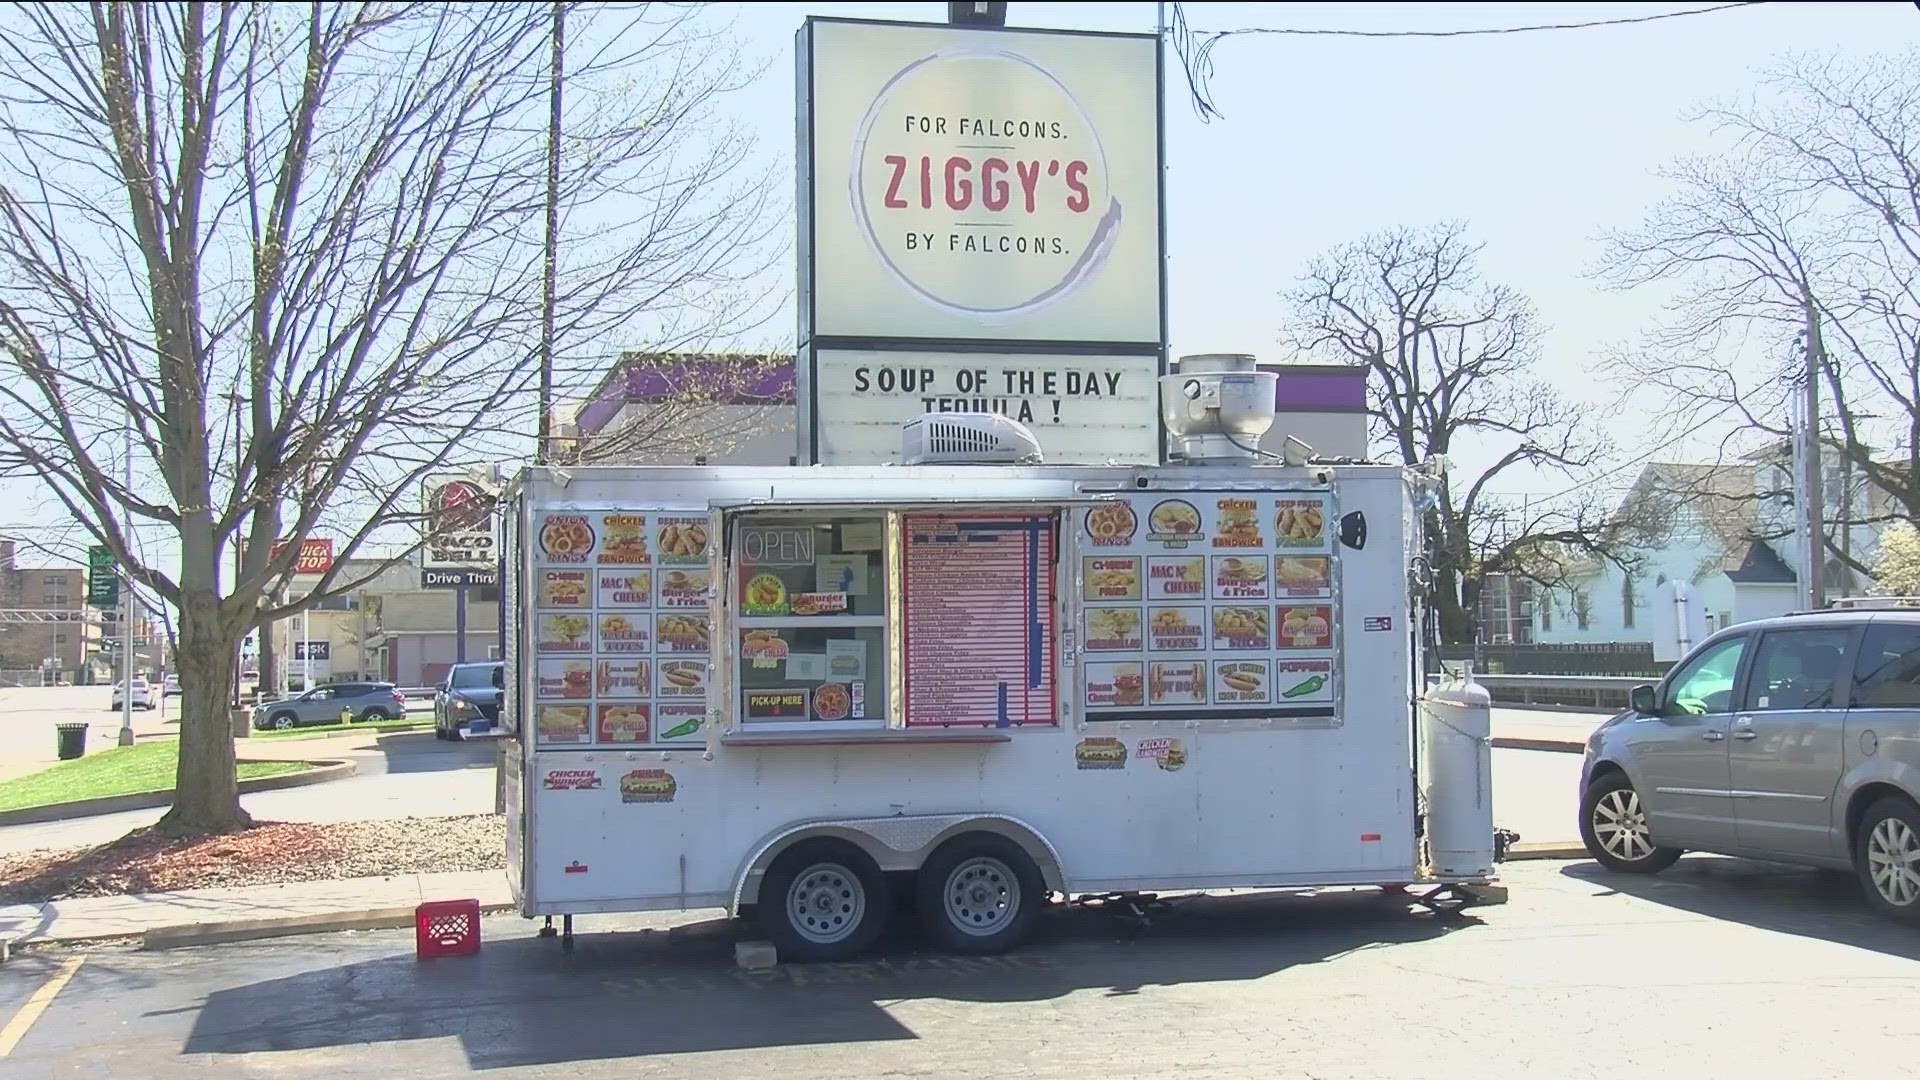 Mahoney's food truck, next to Ziggy's, has been serving great food to the people of Bowling Green for more than two decades.